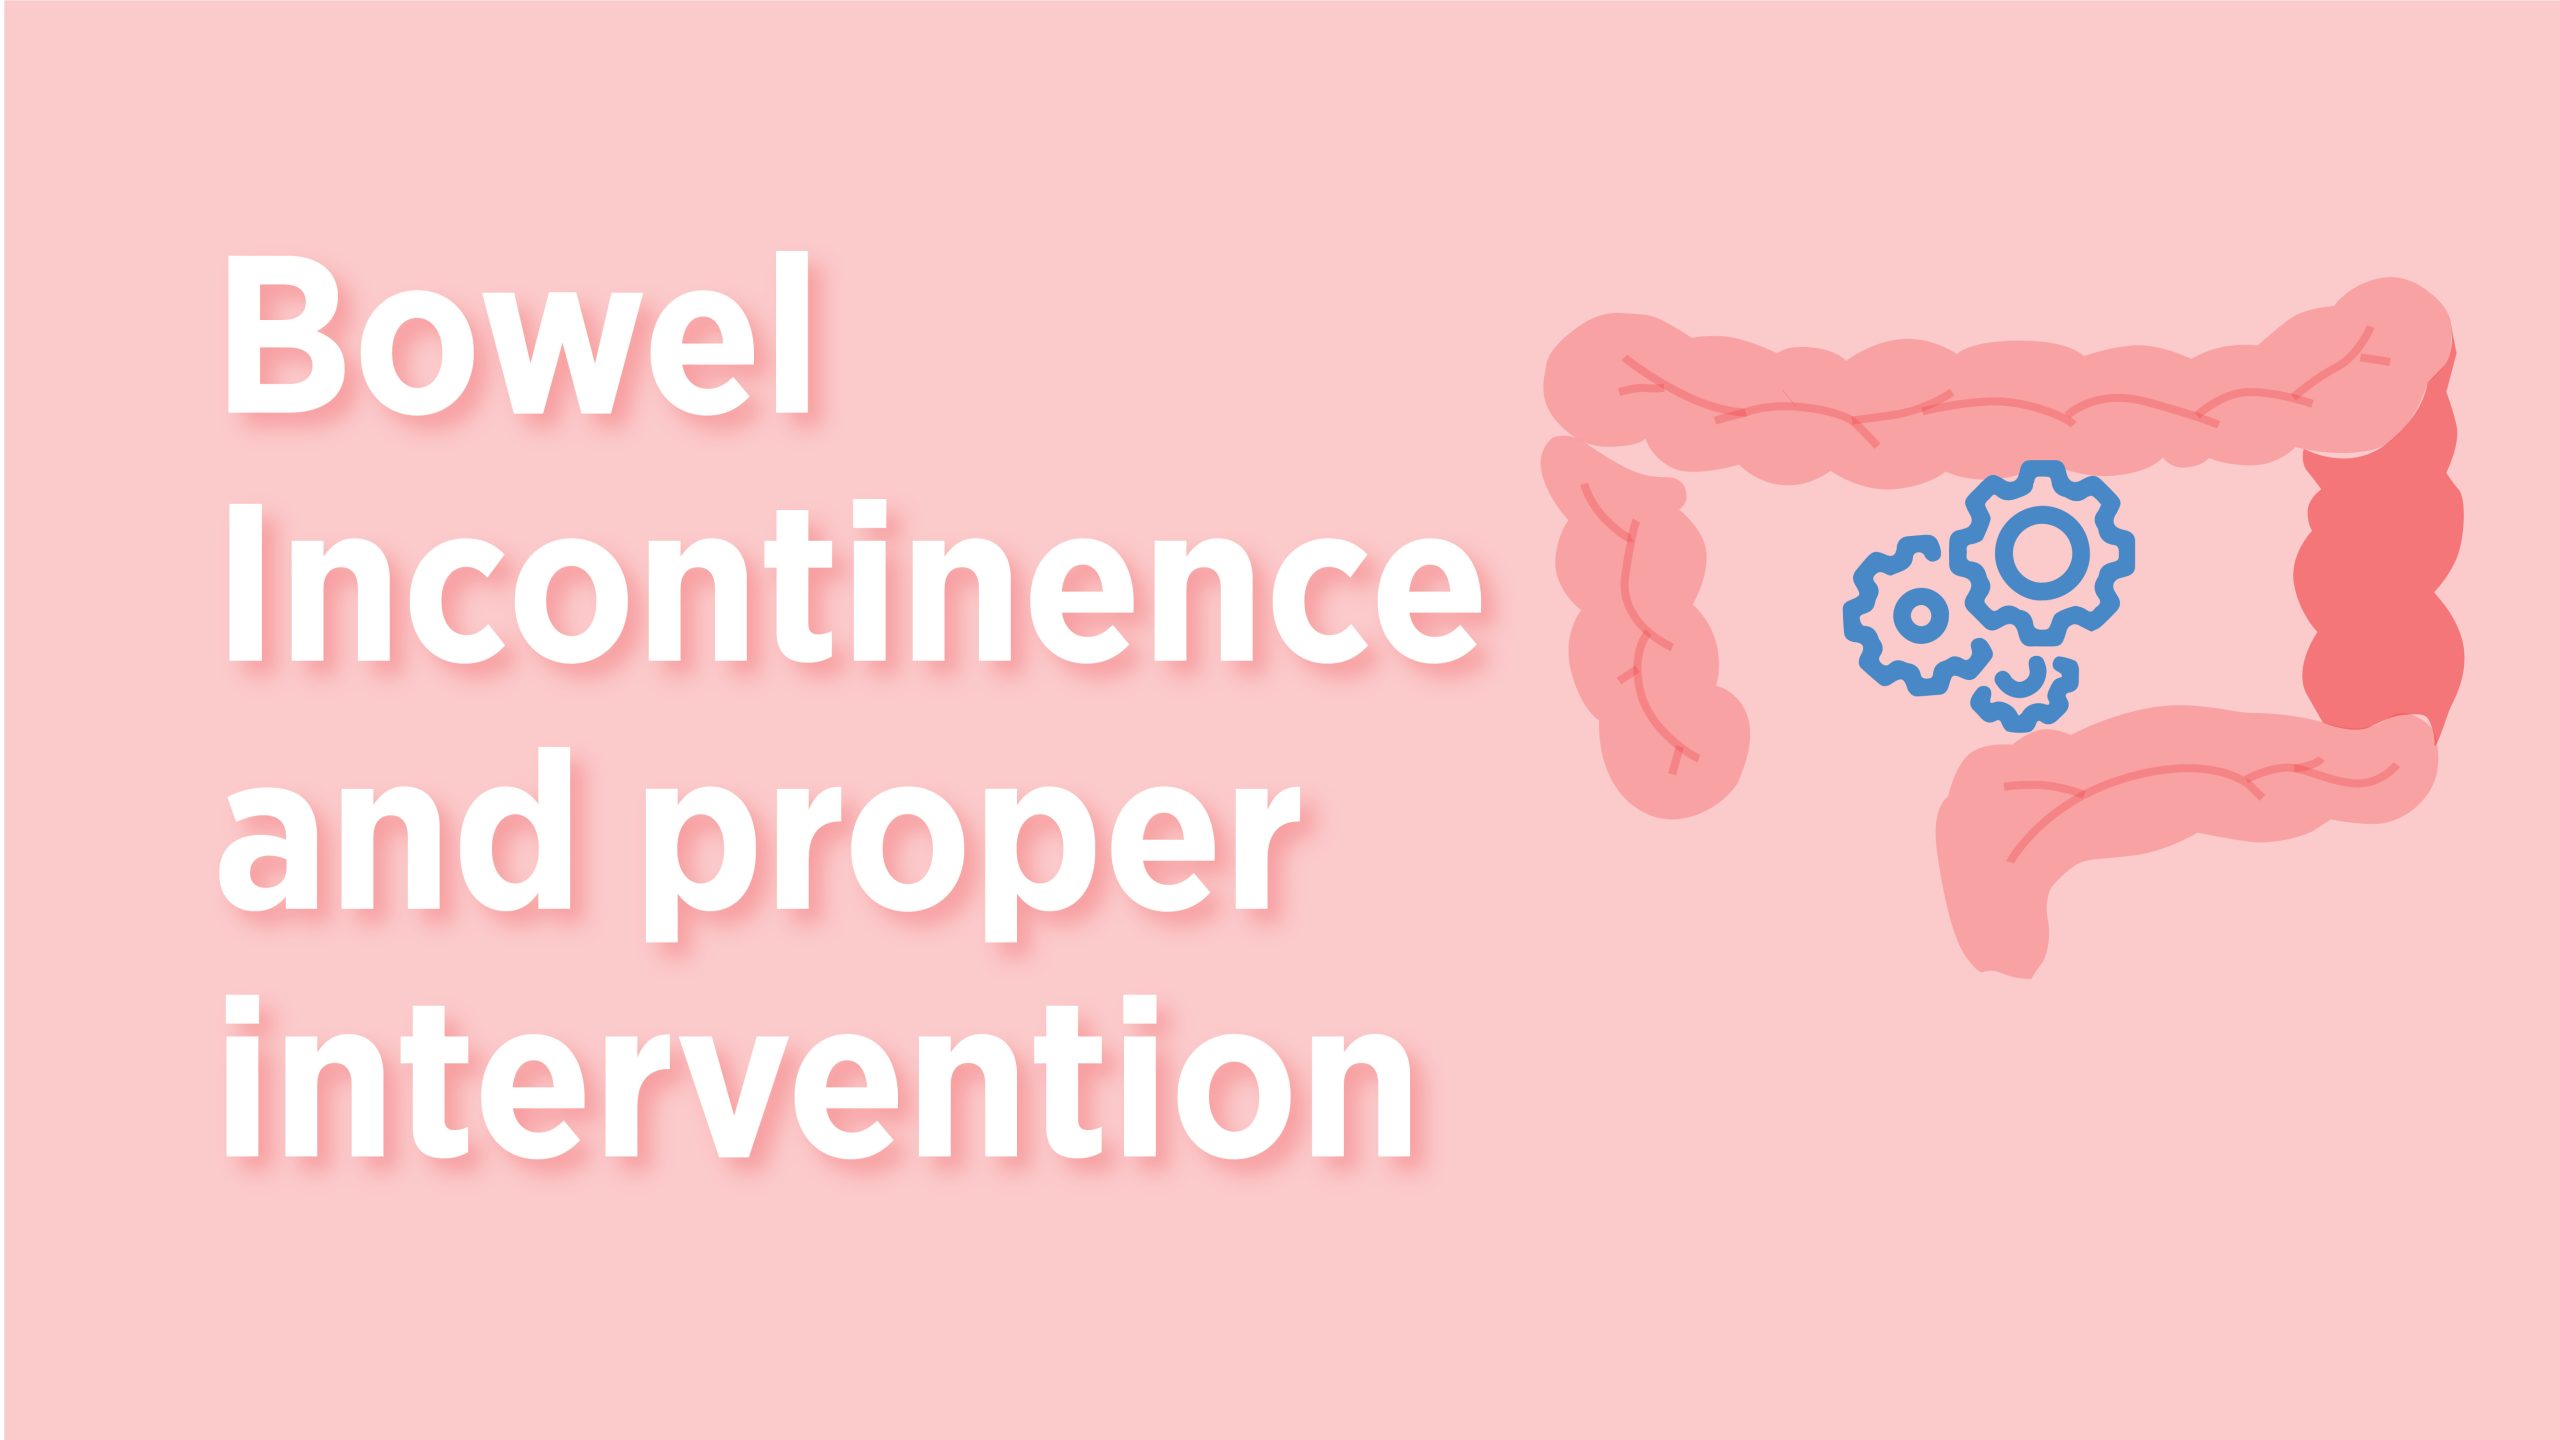 Bowel Incontinence and Proper Intervention